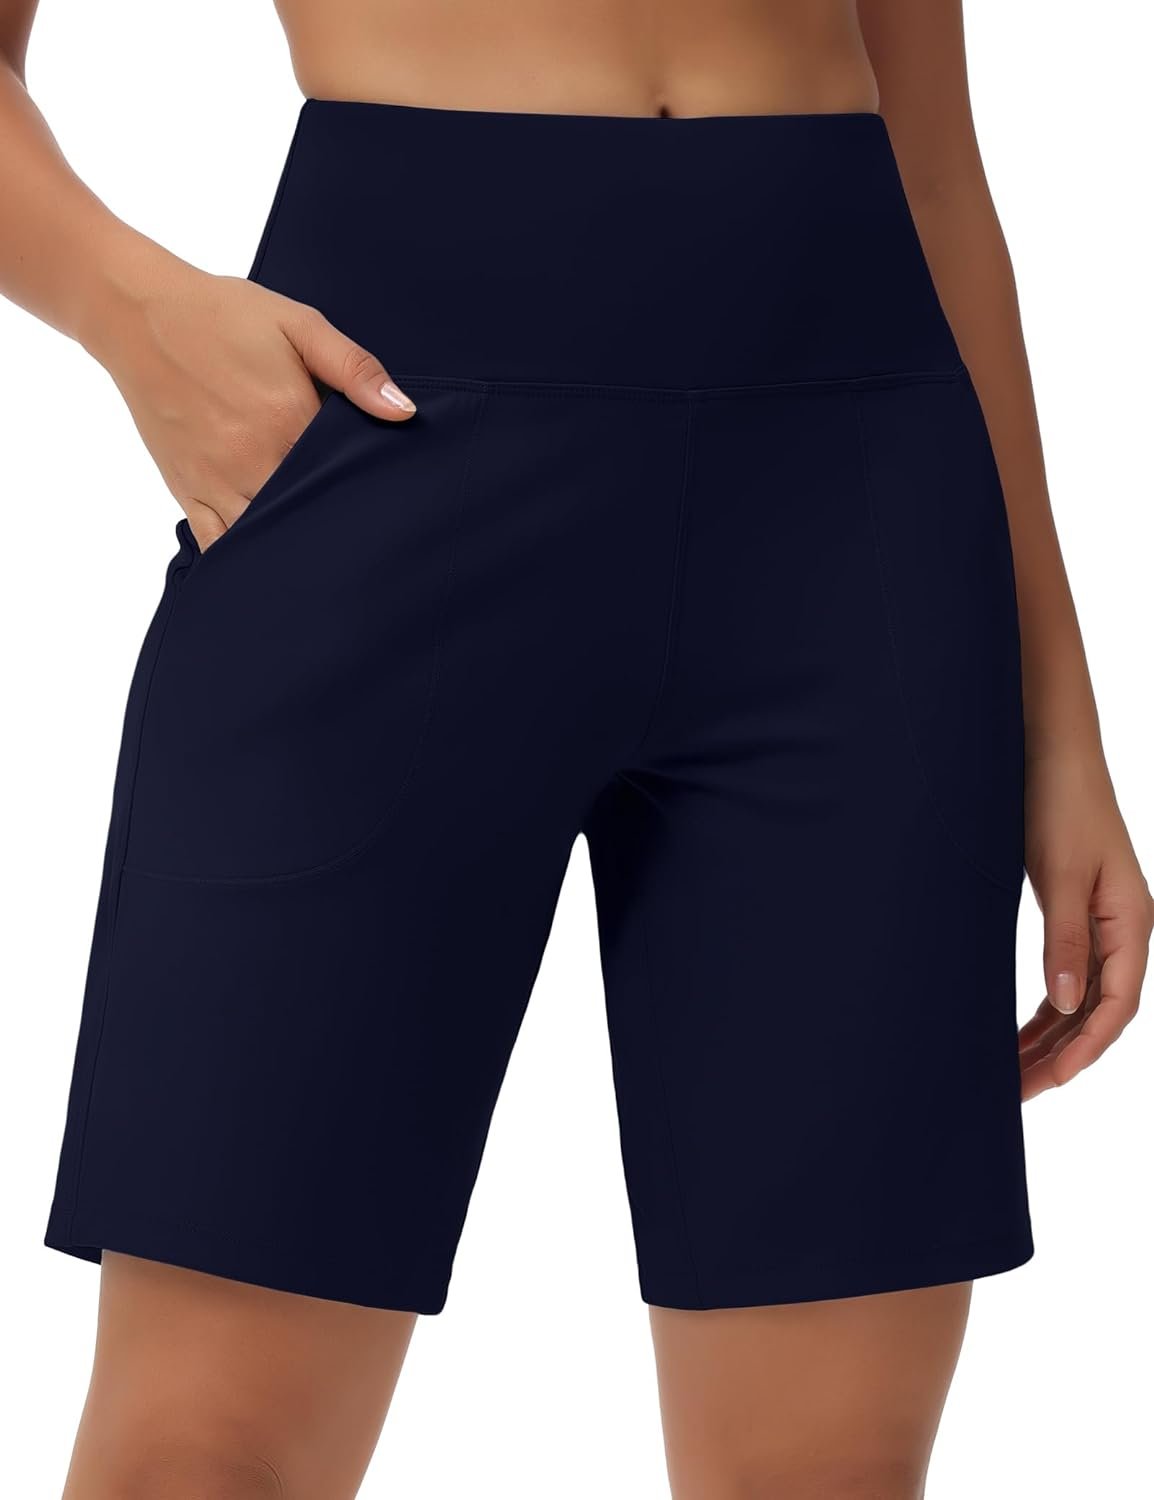 THE GYM PEOPLE Womens High Waisted Bermuda Workout Shorts Long Hiking Running Shorts with Zipper Pockets